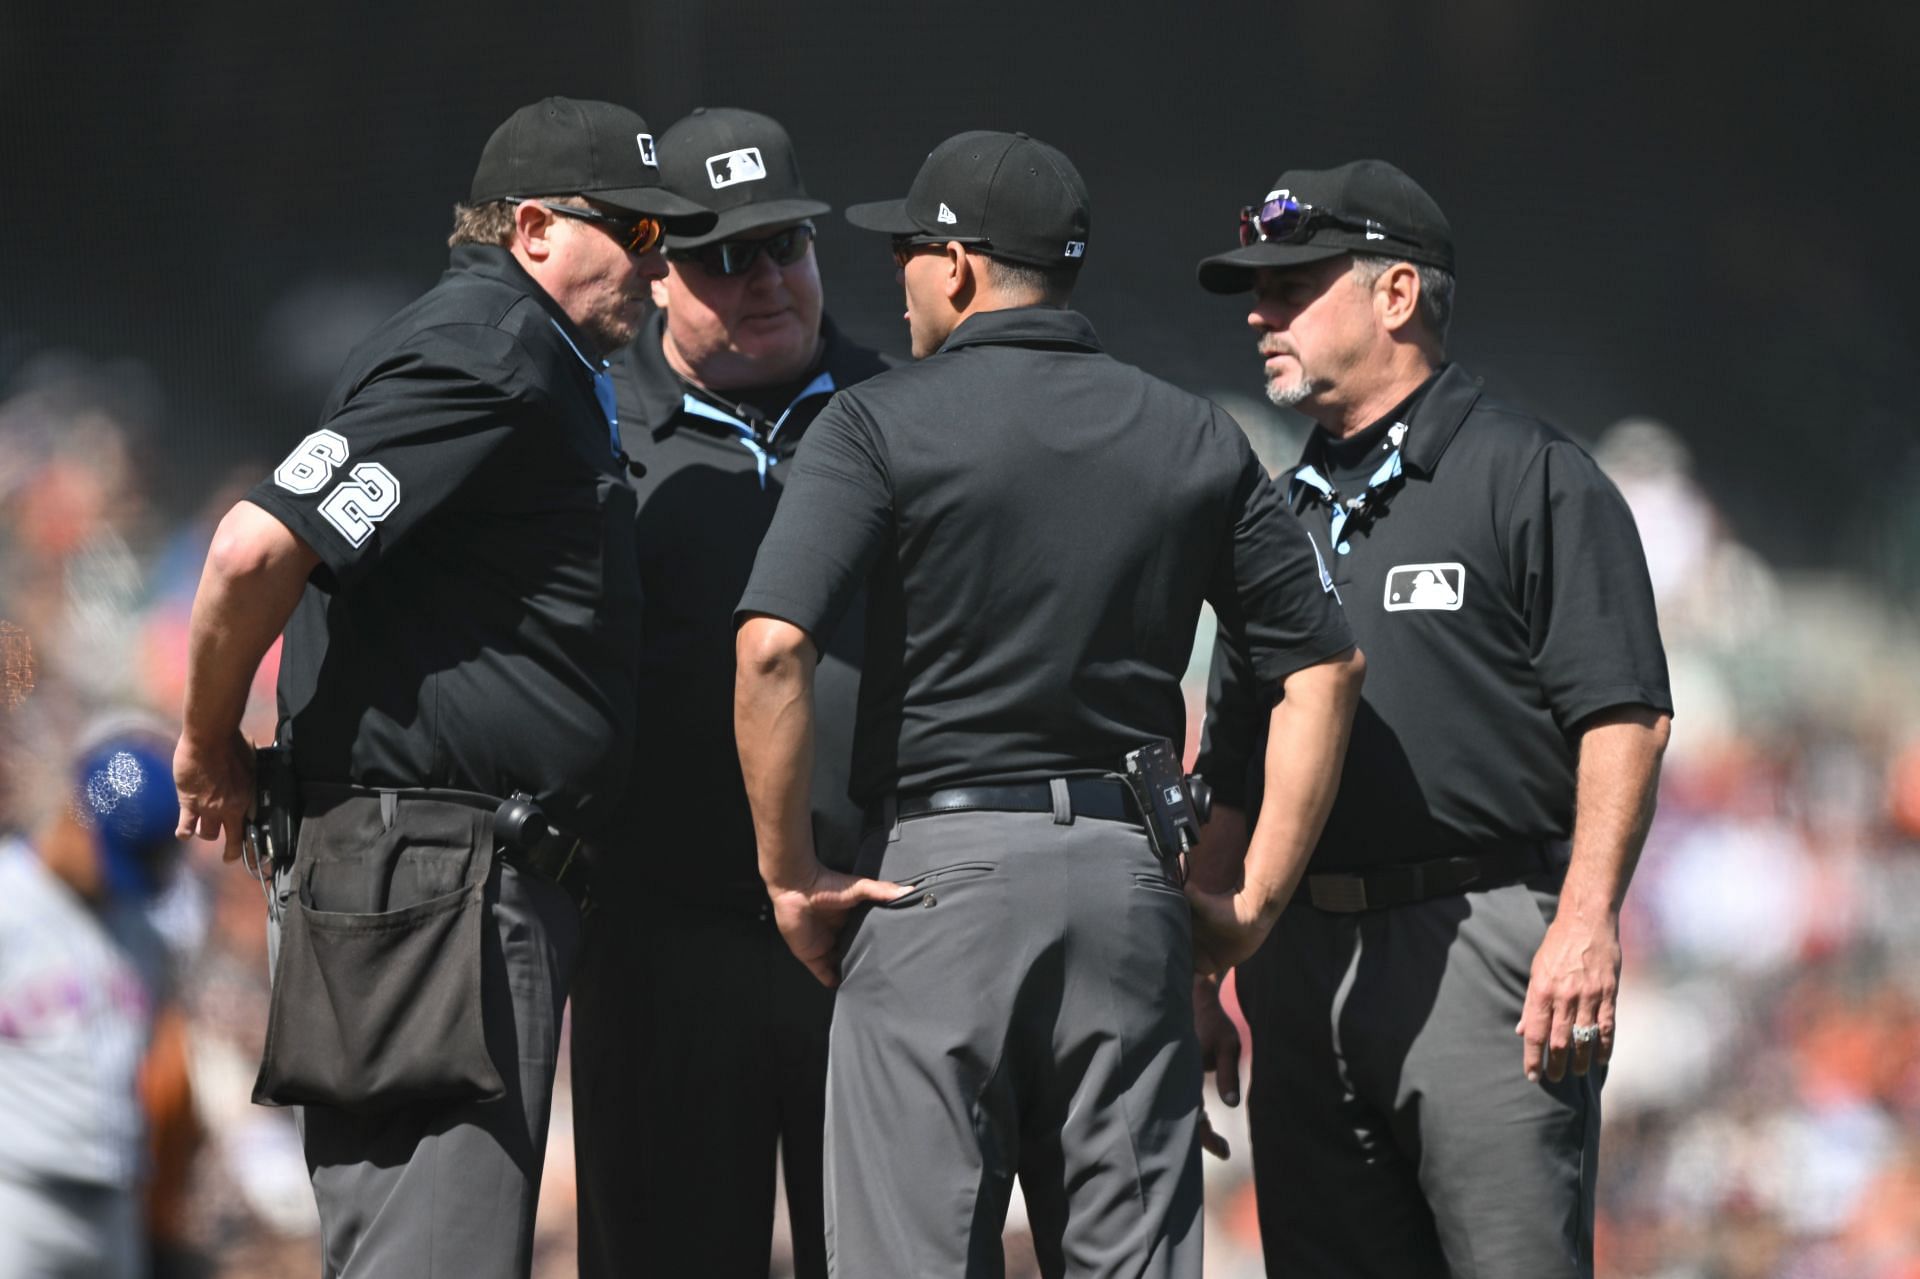 Roberto Ortiz named MLB's first full-time ump from Puerto Rico